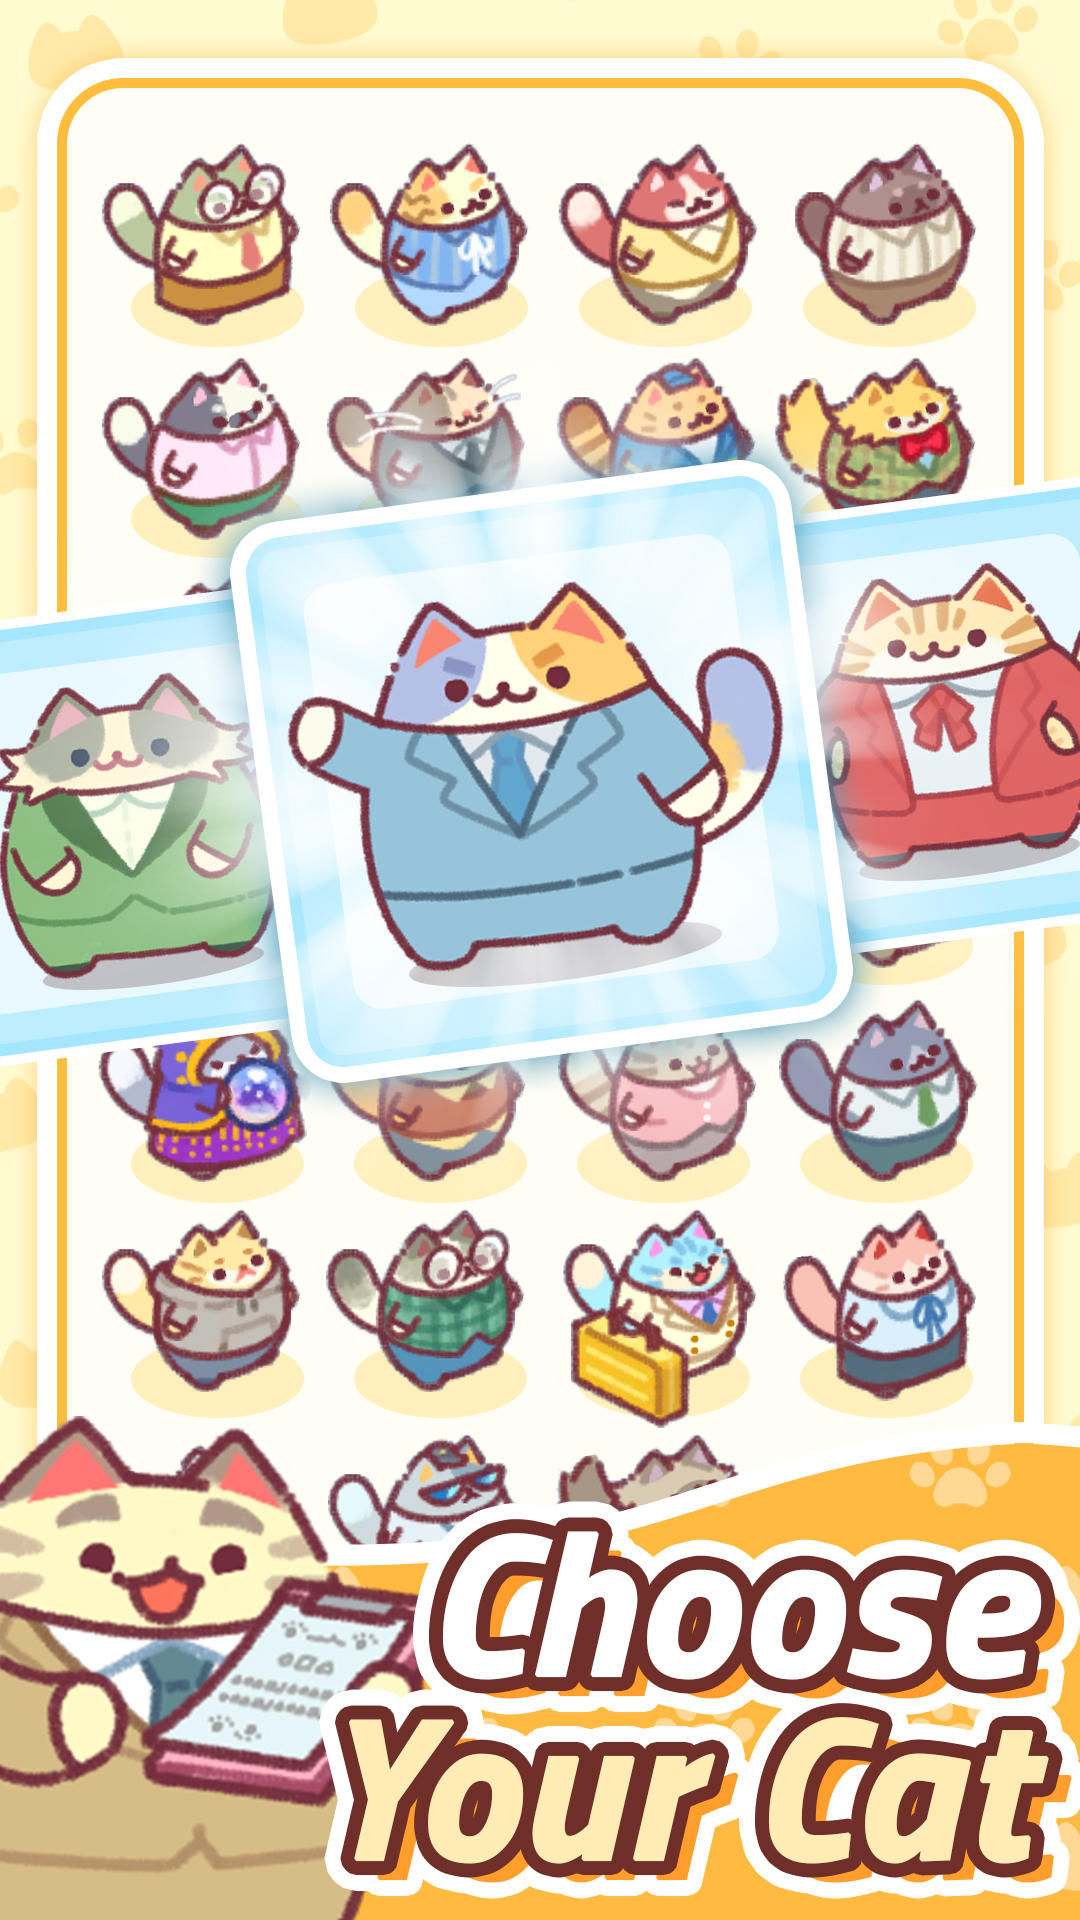 Office Cat: Idle Tycoon Game screenshot game